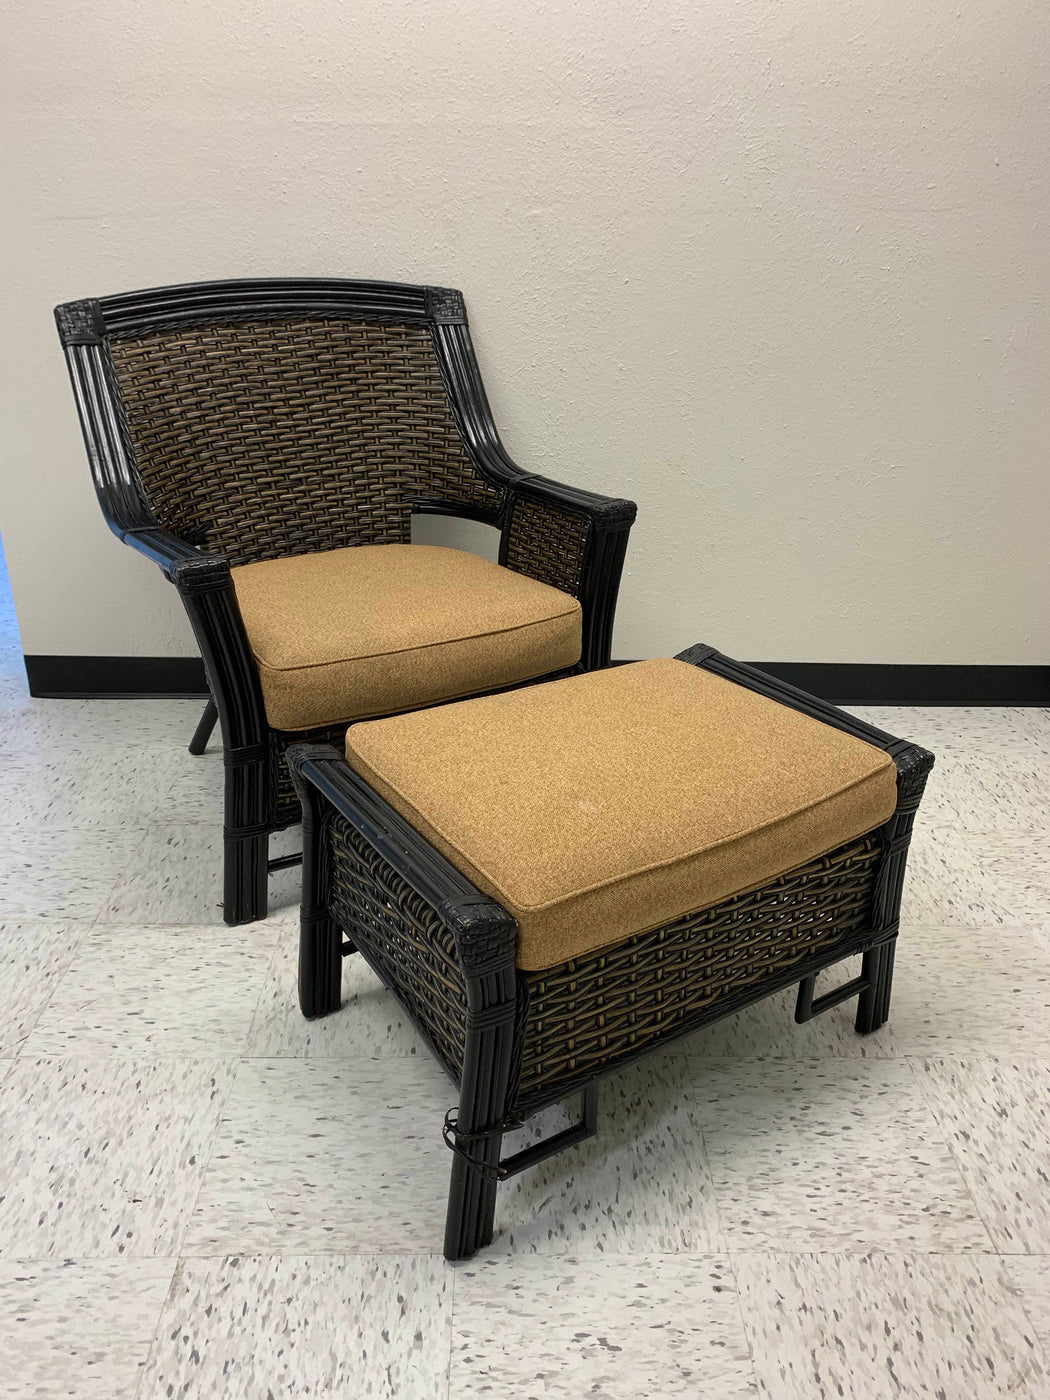 Pier One Wicker Chair And Ottoman